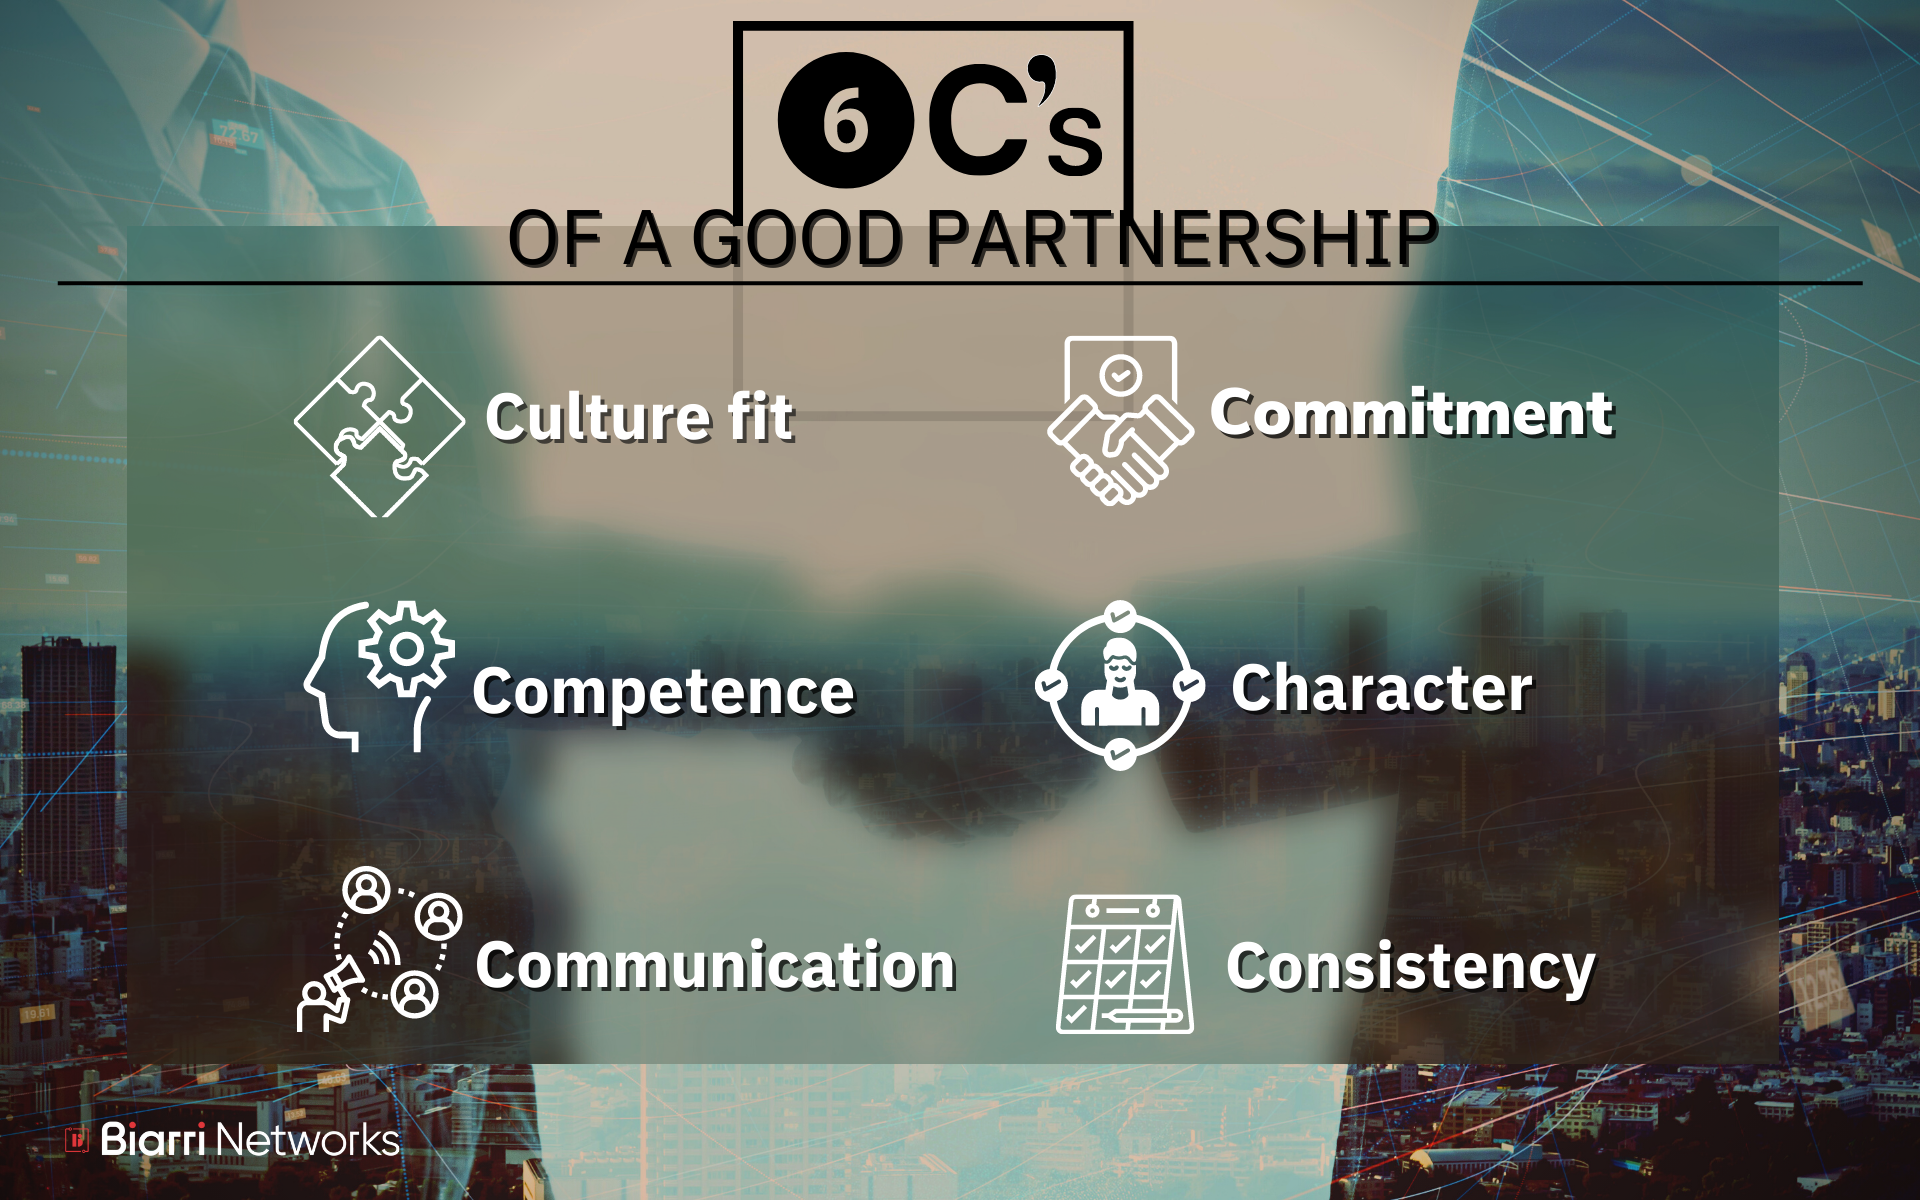 The 6 C's of a healthy partnership